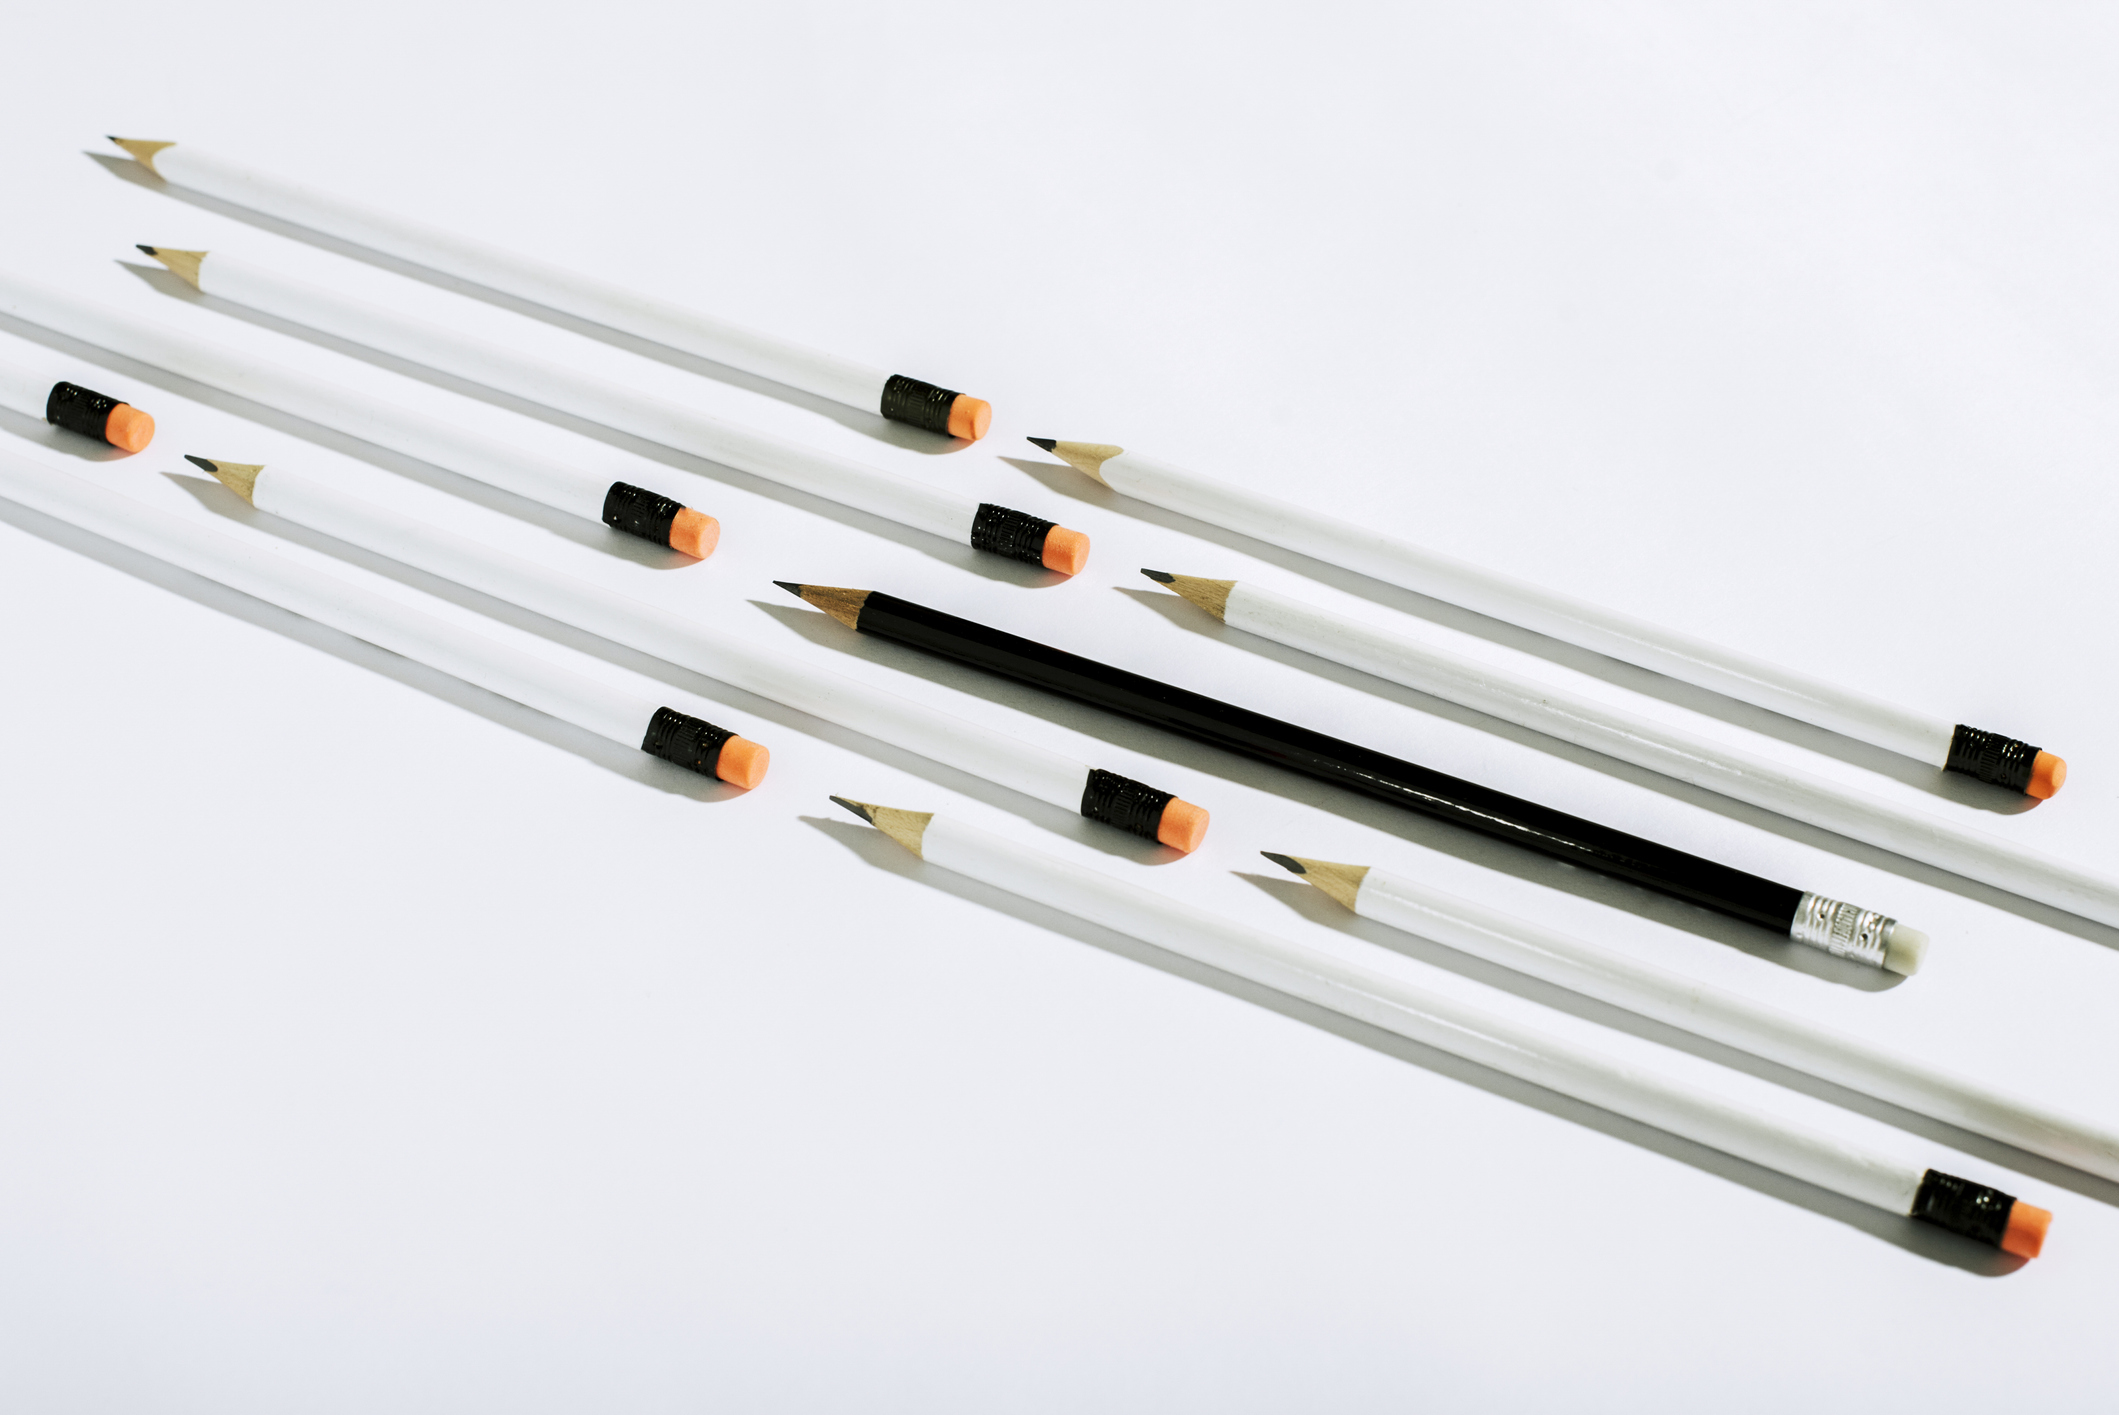 A row of white pencils and a black pencil lie on a white background